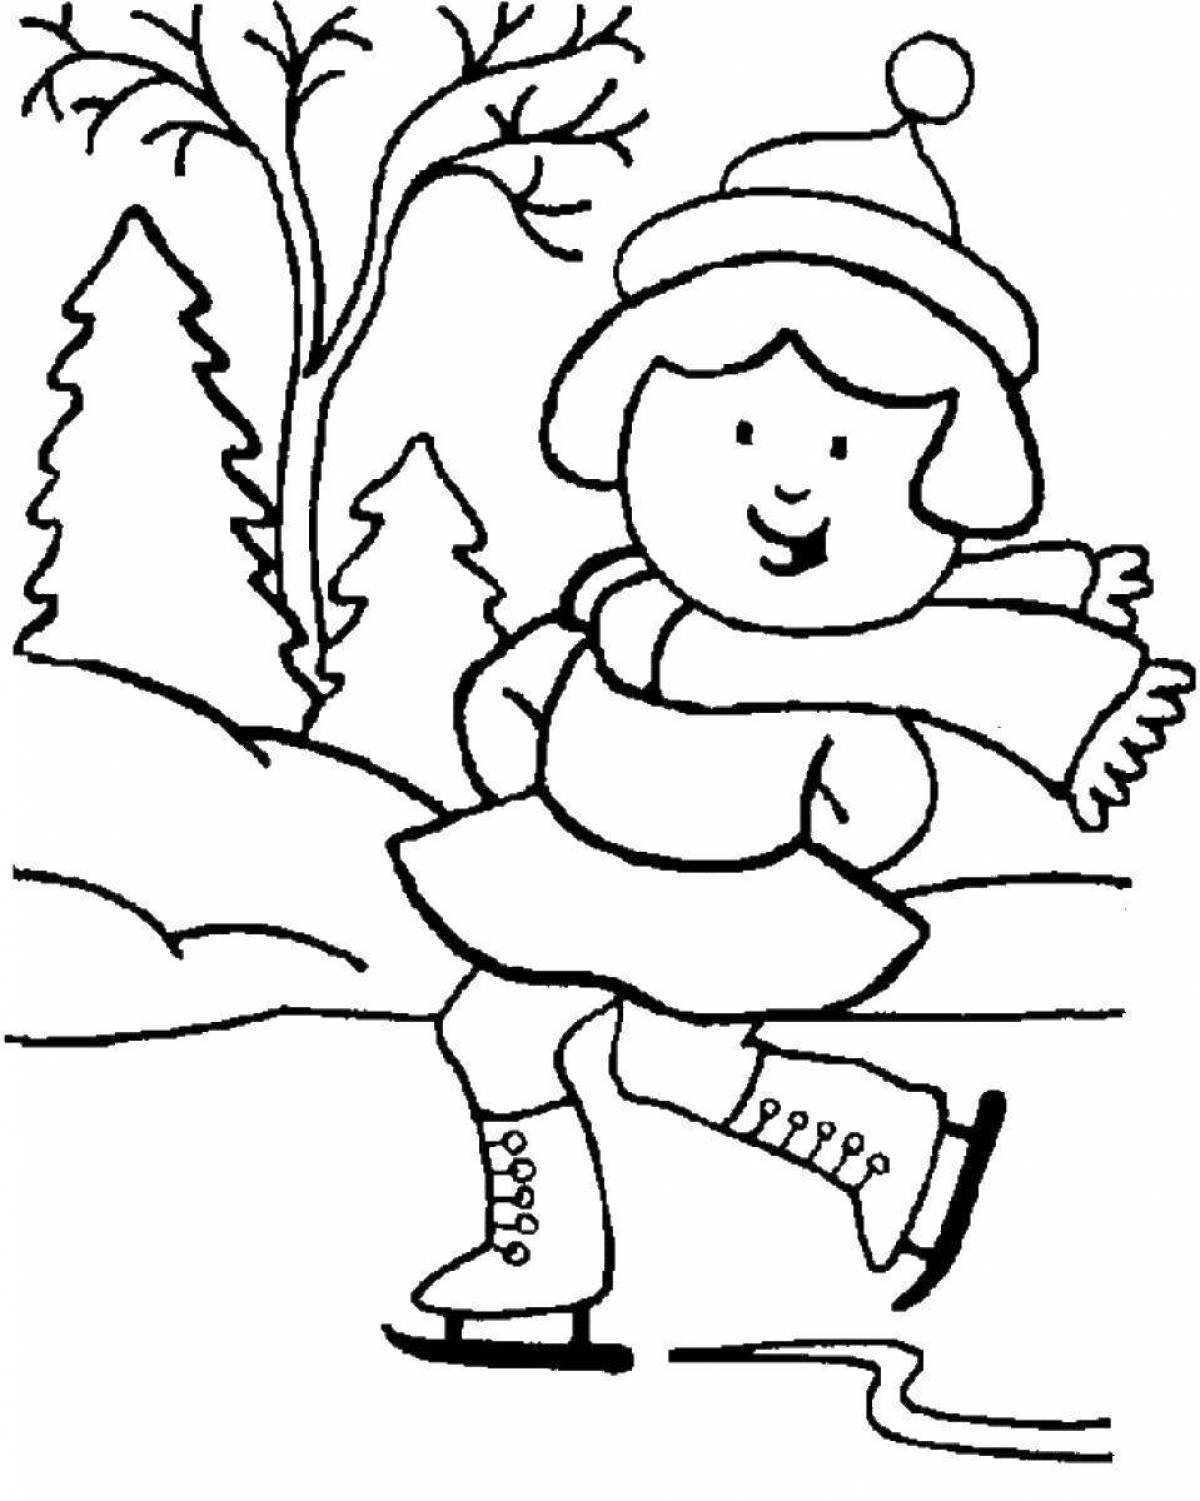 Blissful winter coloring book for 4-5 year olds